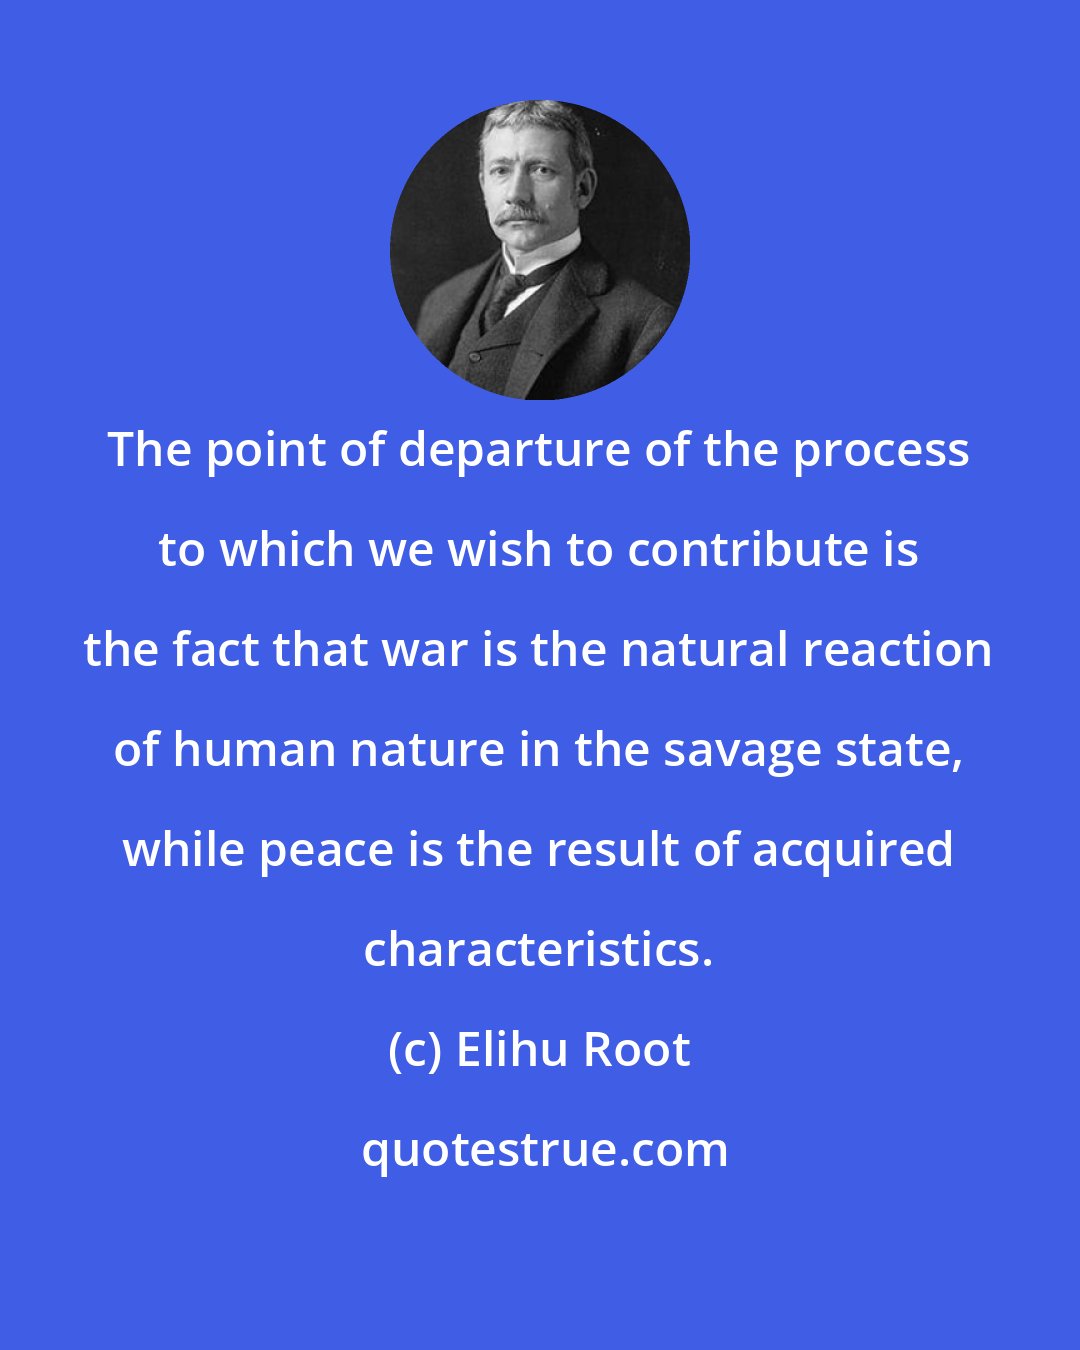 Elihu Root: The point of departure of the process to which we wish to contribute is the fact that war is the natural reaction of human nature in the savage state, while peace is the result of acquired characteristics.